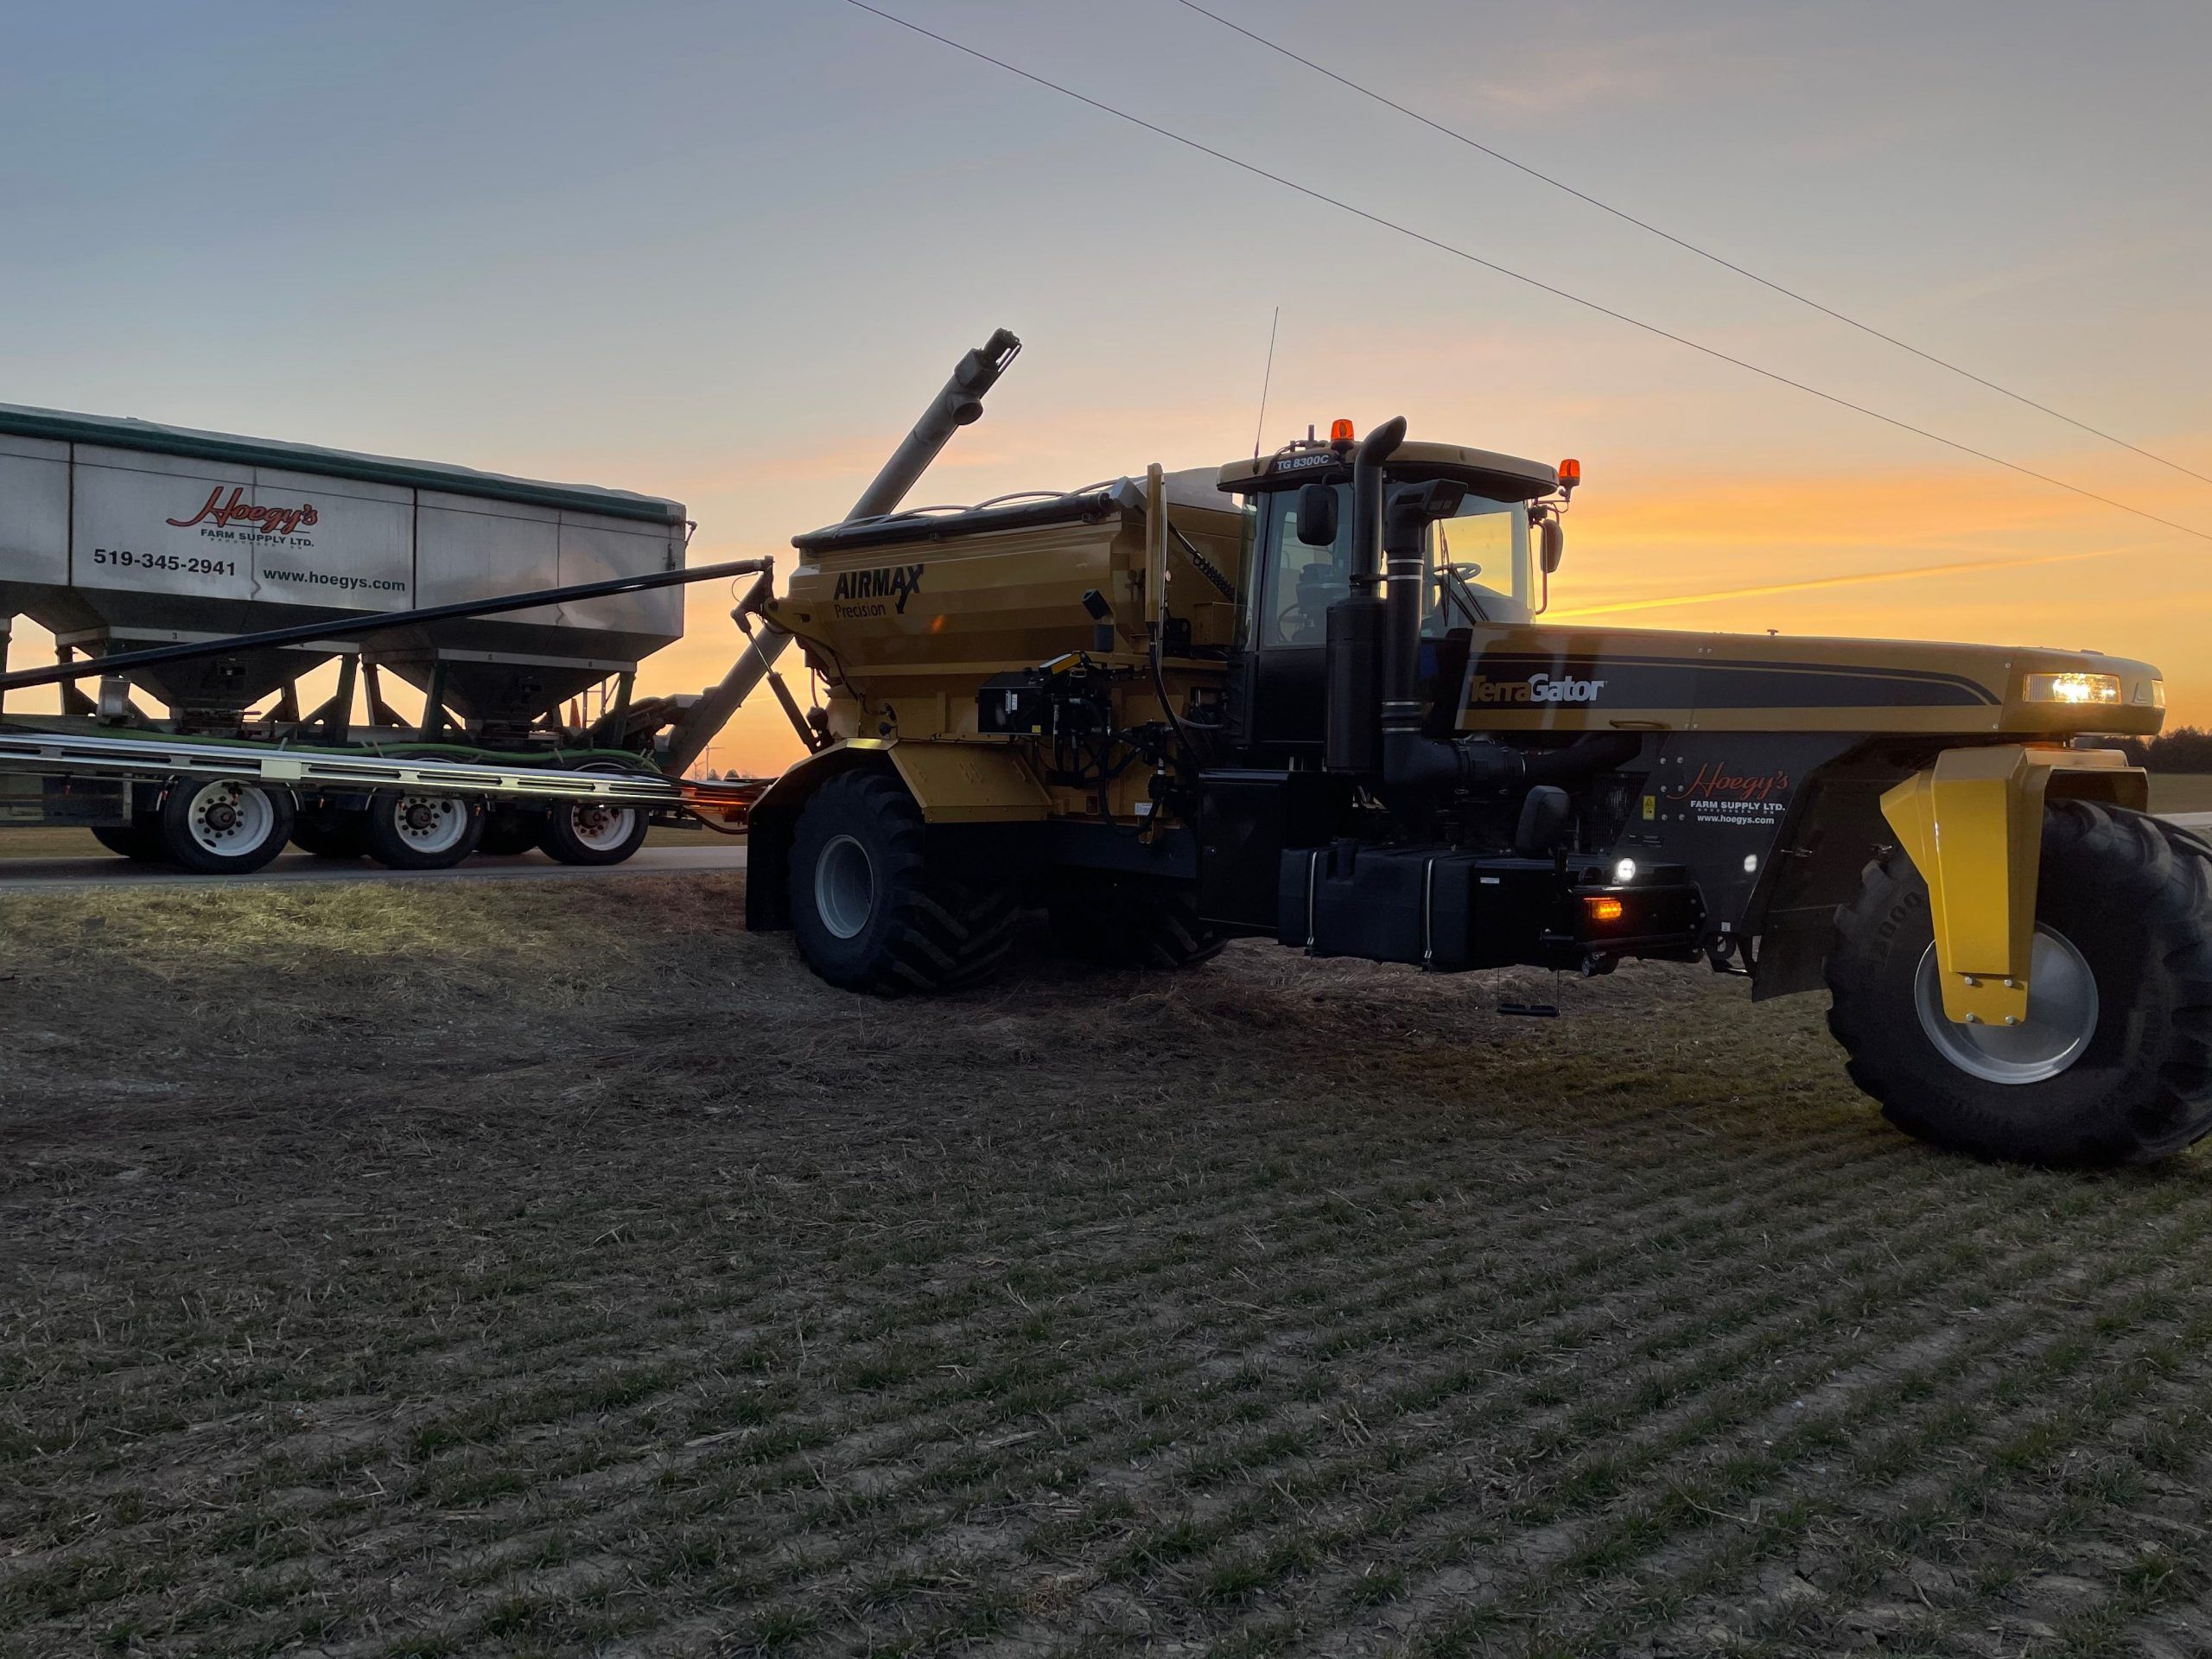 Image of Fertilizer Terra Gator with sunset in the background.